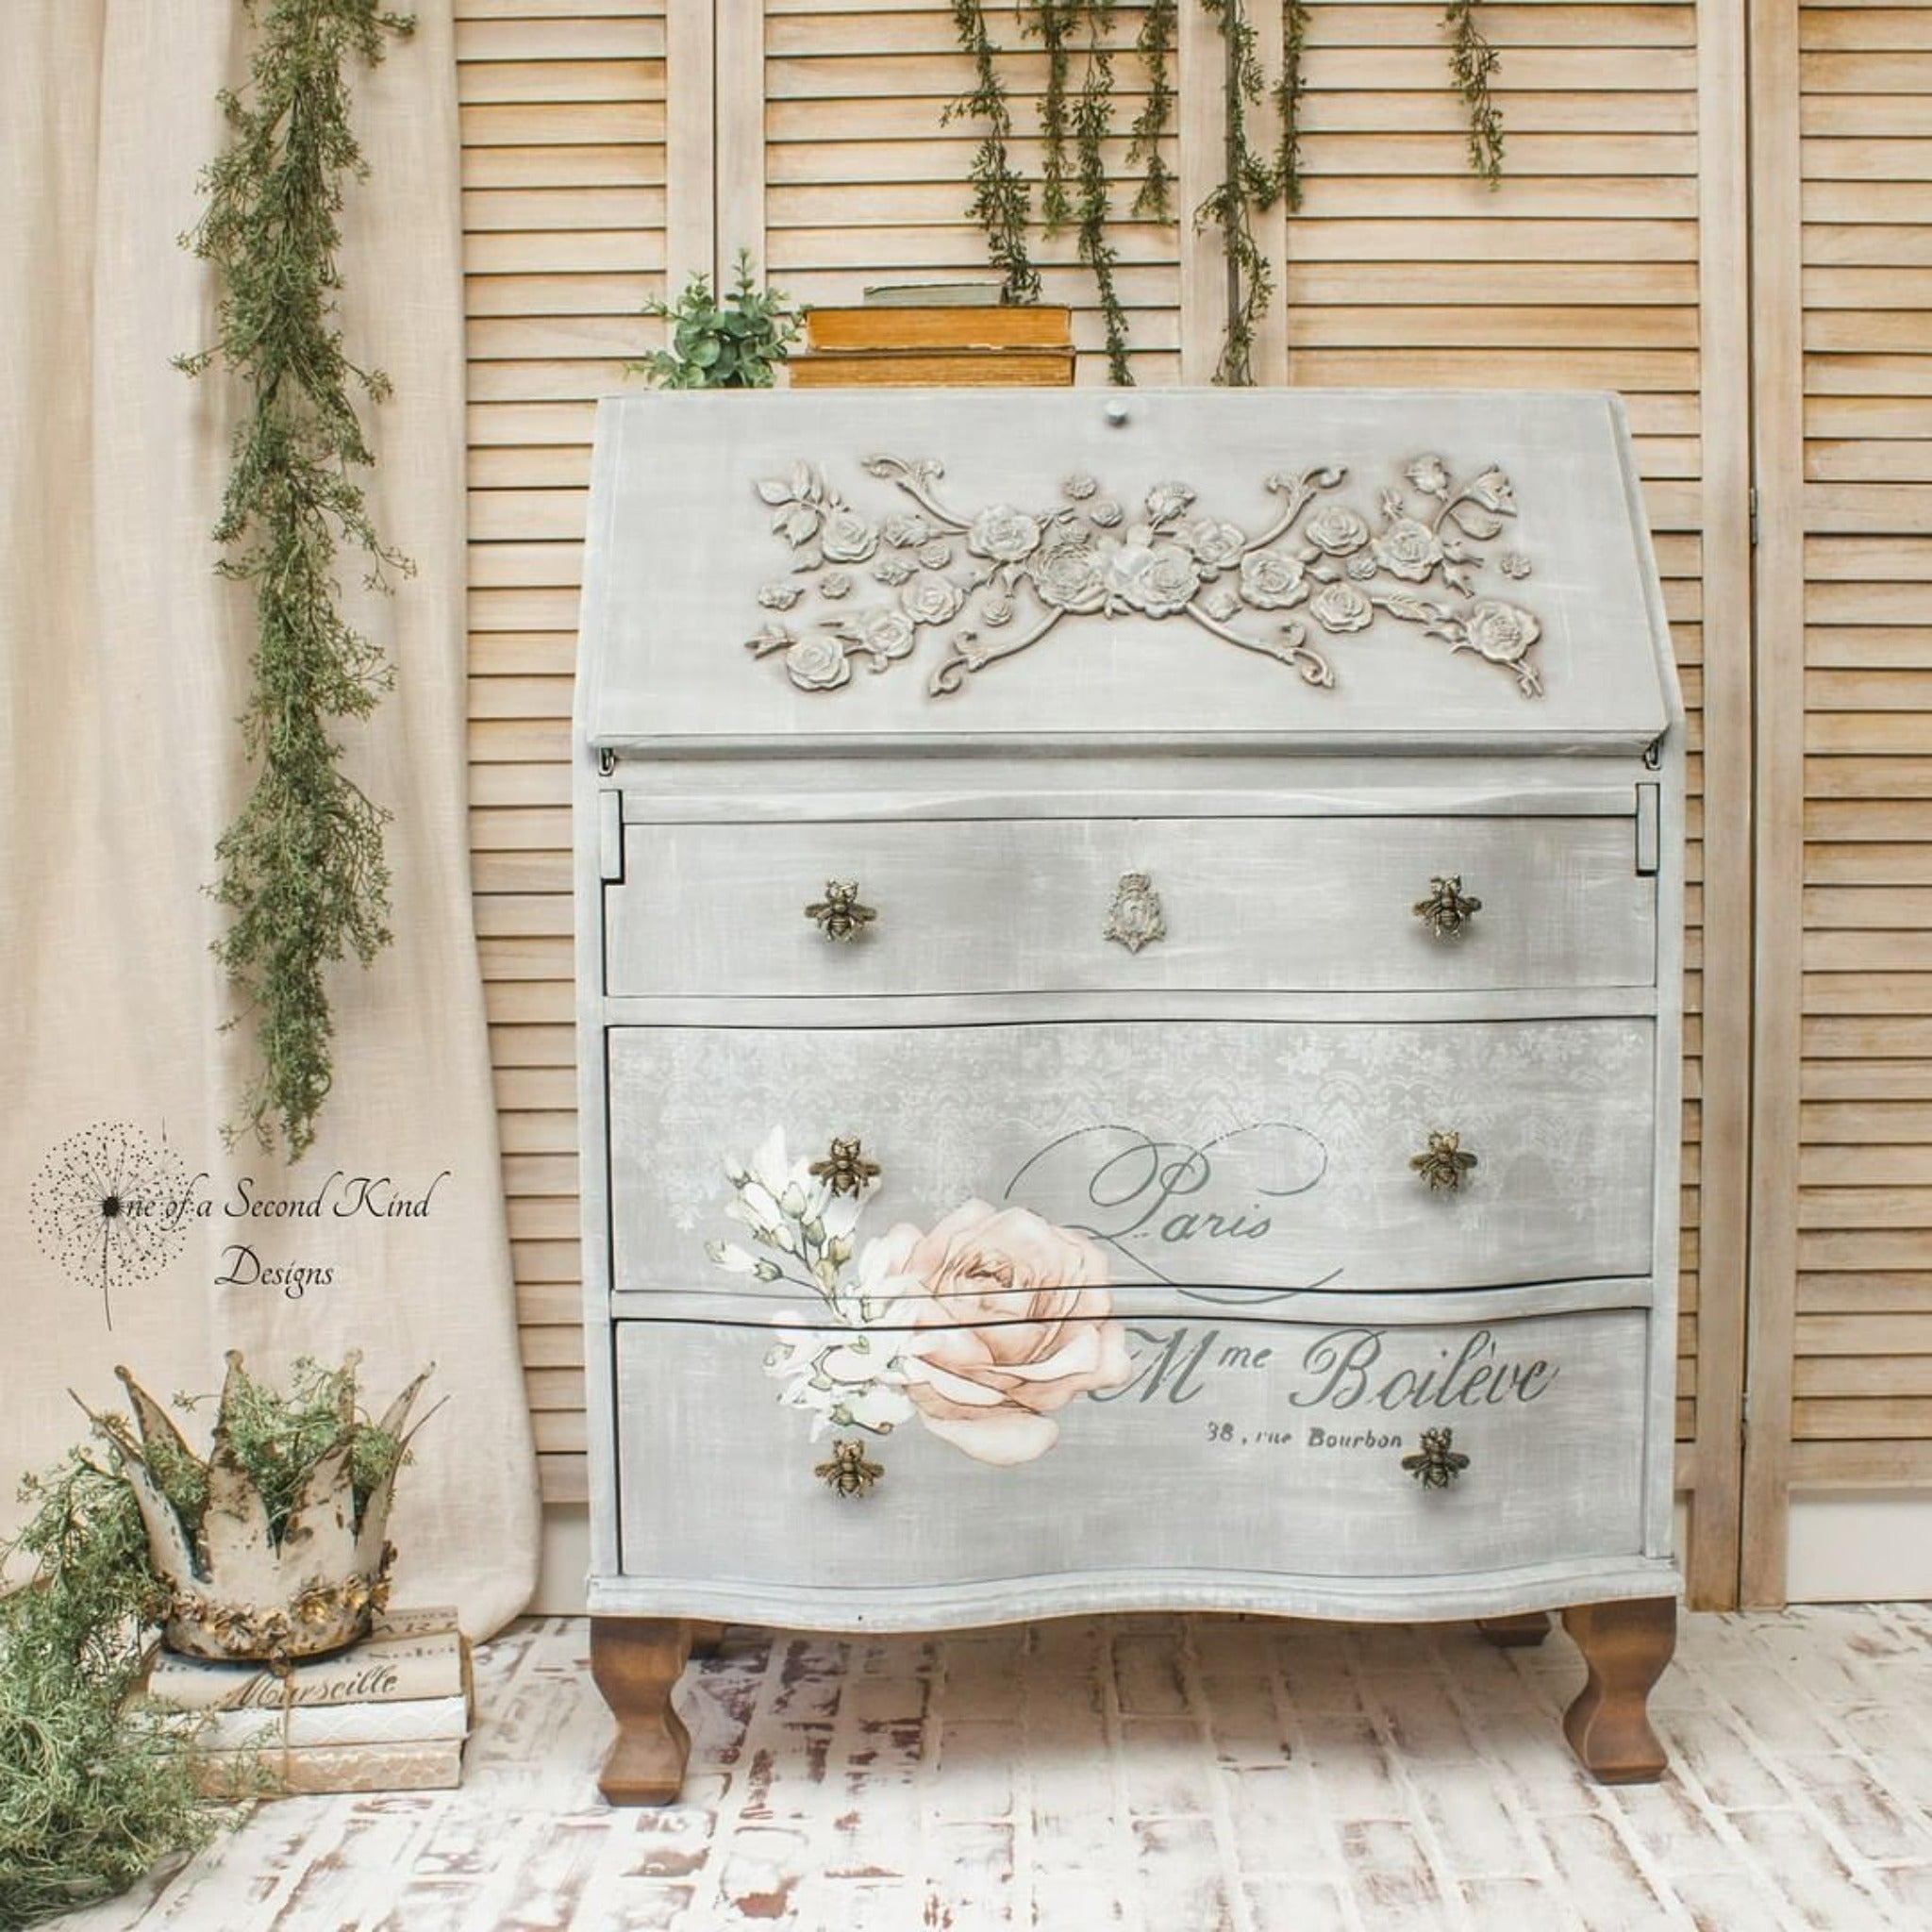 A vintage secretary's desk refurbished by One of a Second Kind Designs is painted light grey and features the Chatellerault transfer on its drawers.